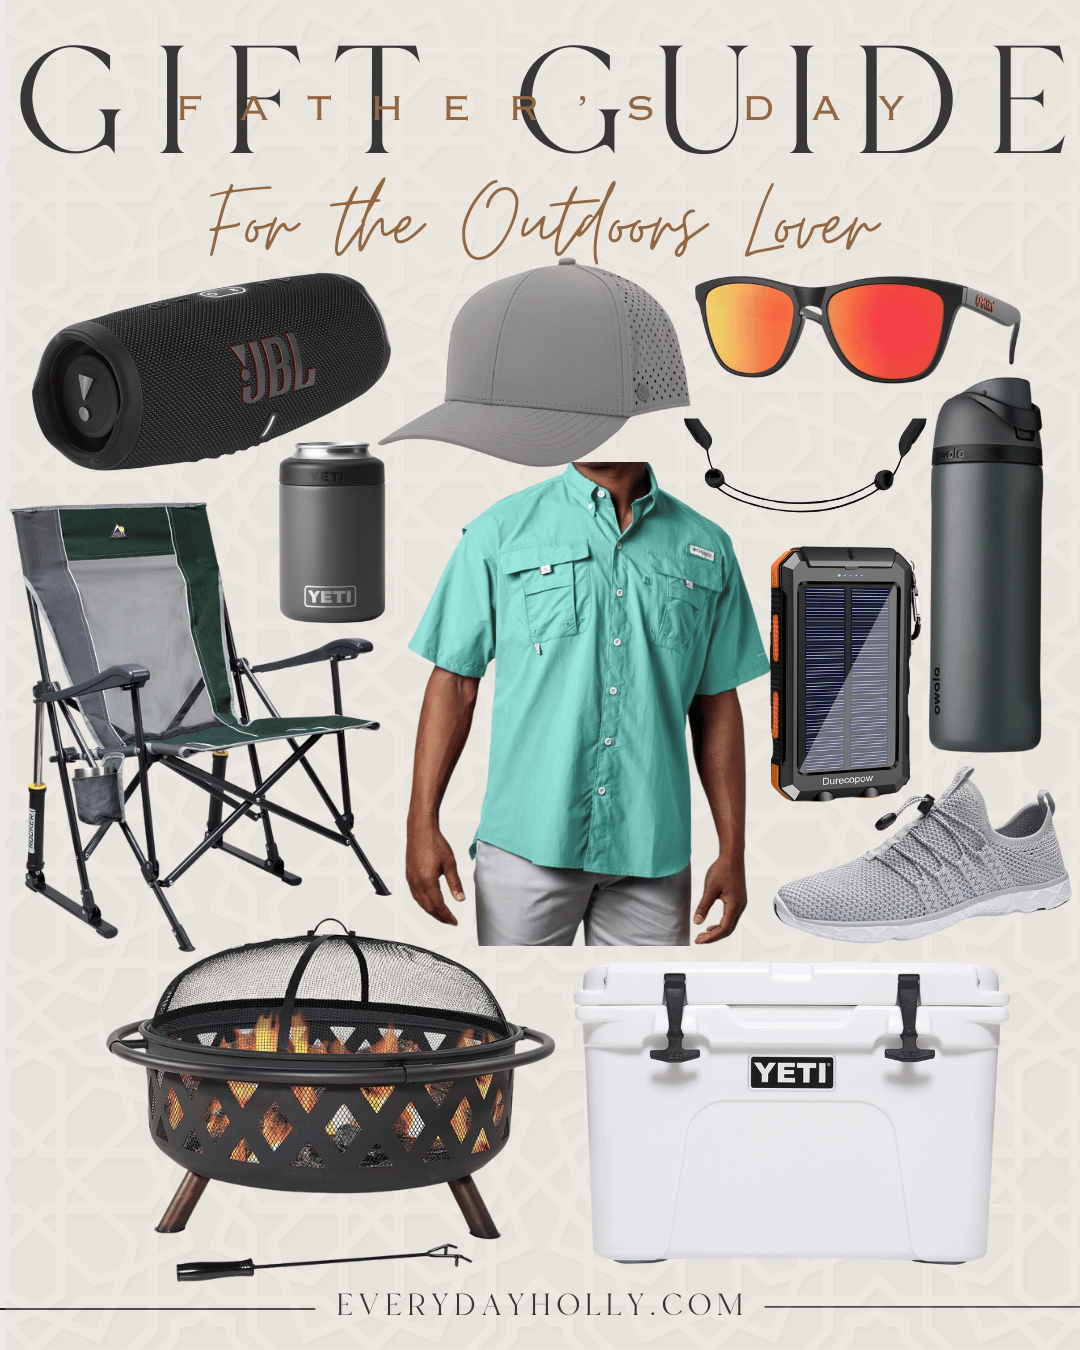 55 Gift Ideas your Dad will love this Father's Day | Father's Day, Father's day gift guide, gifts for dad, gifts for him, outdoors lover, outdoorsy, camping, rocking chair, hiking, quick dry, Amazon